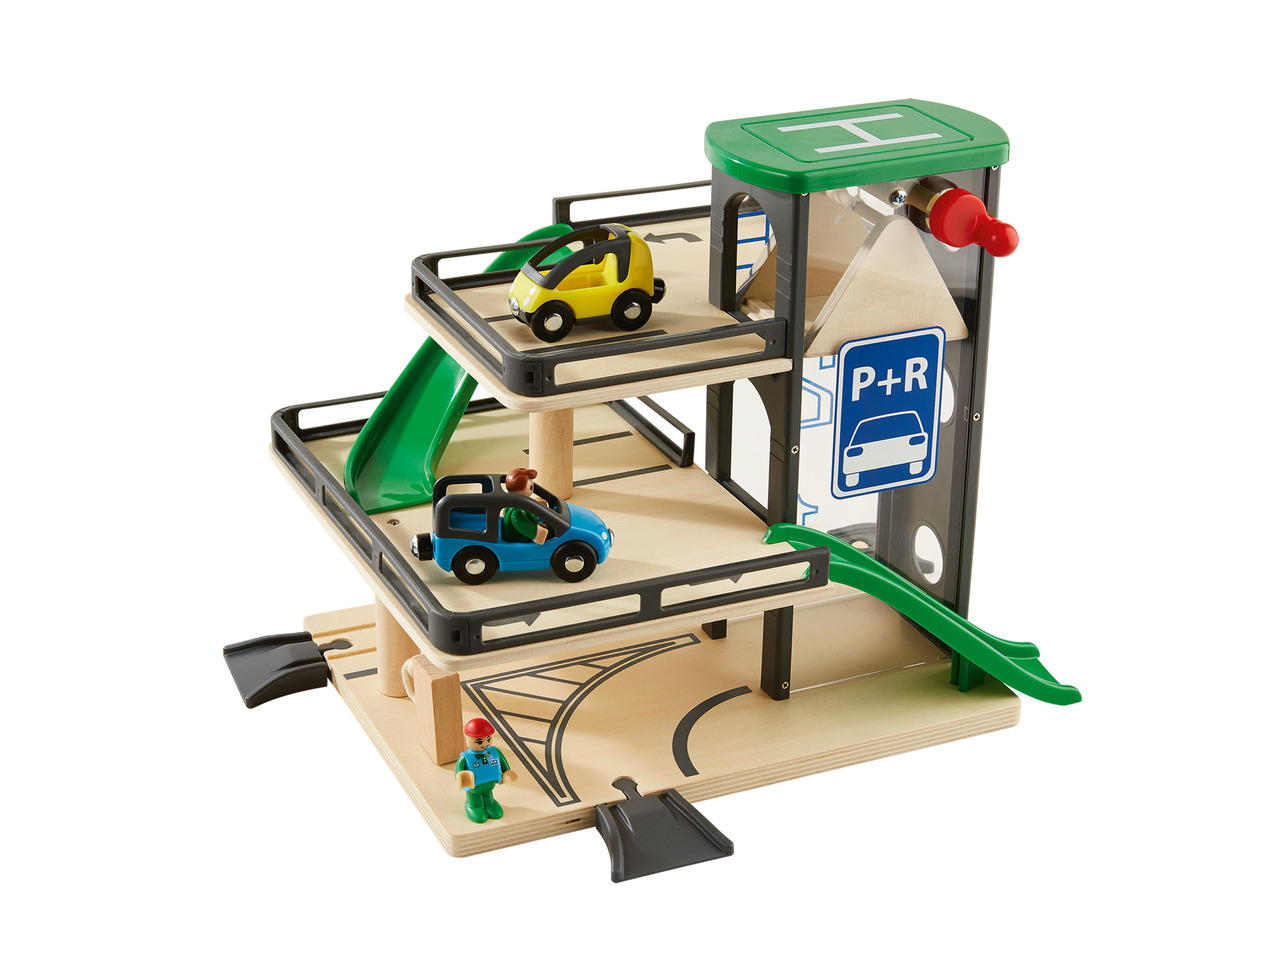 Playtive Junior Garage, Airport or Track Extensions1